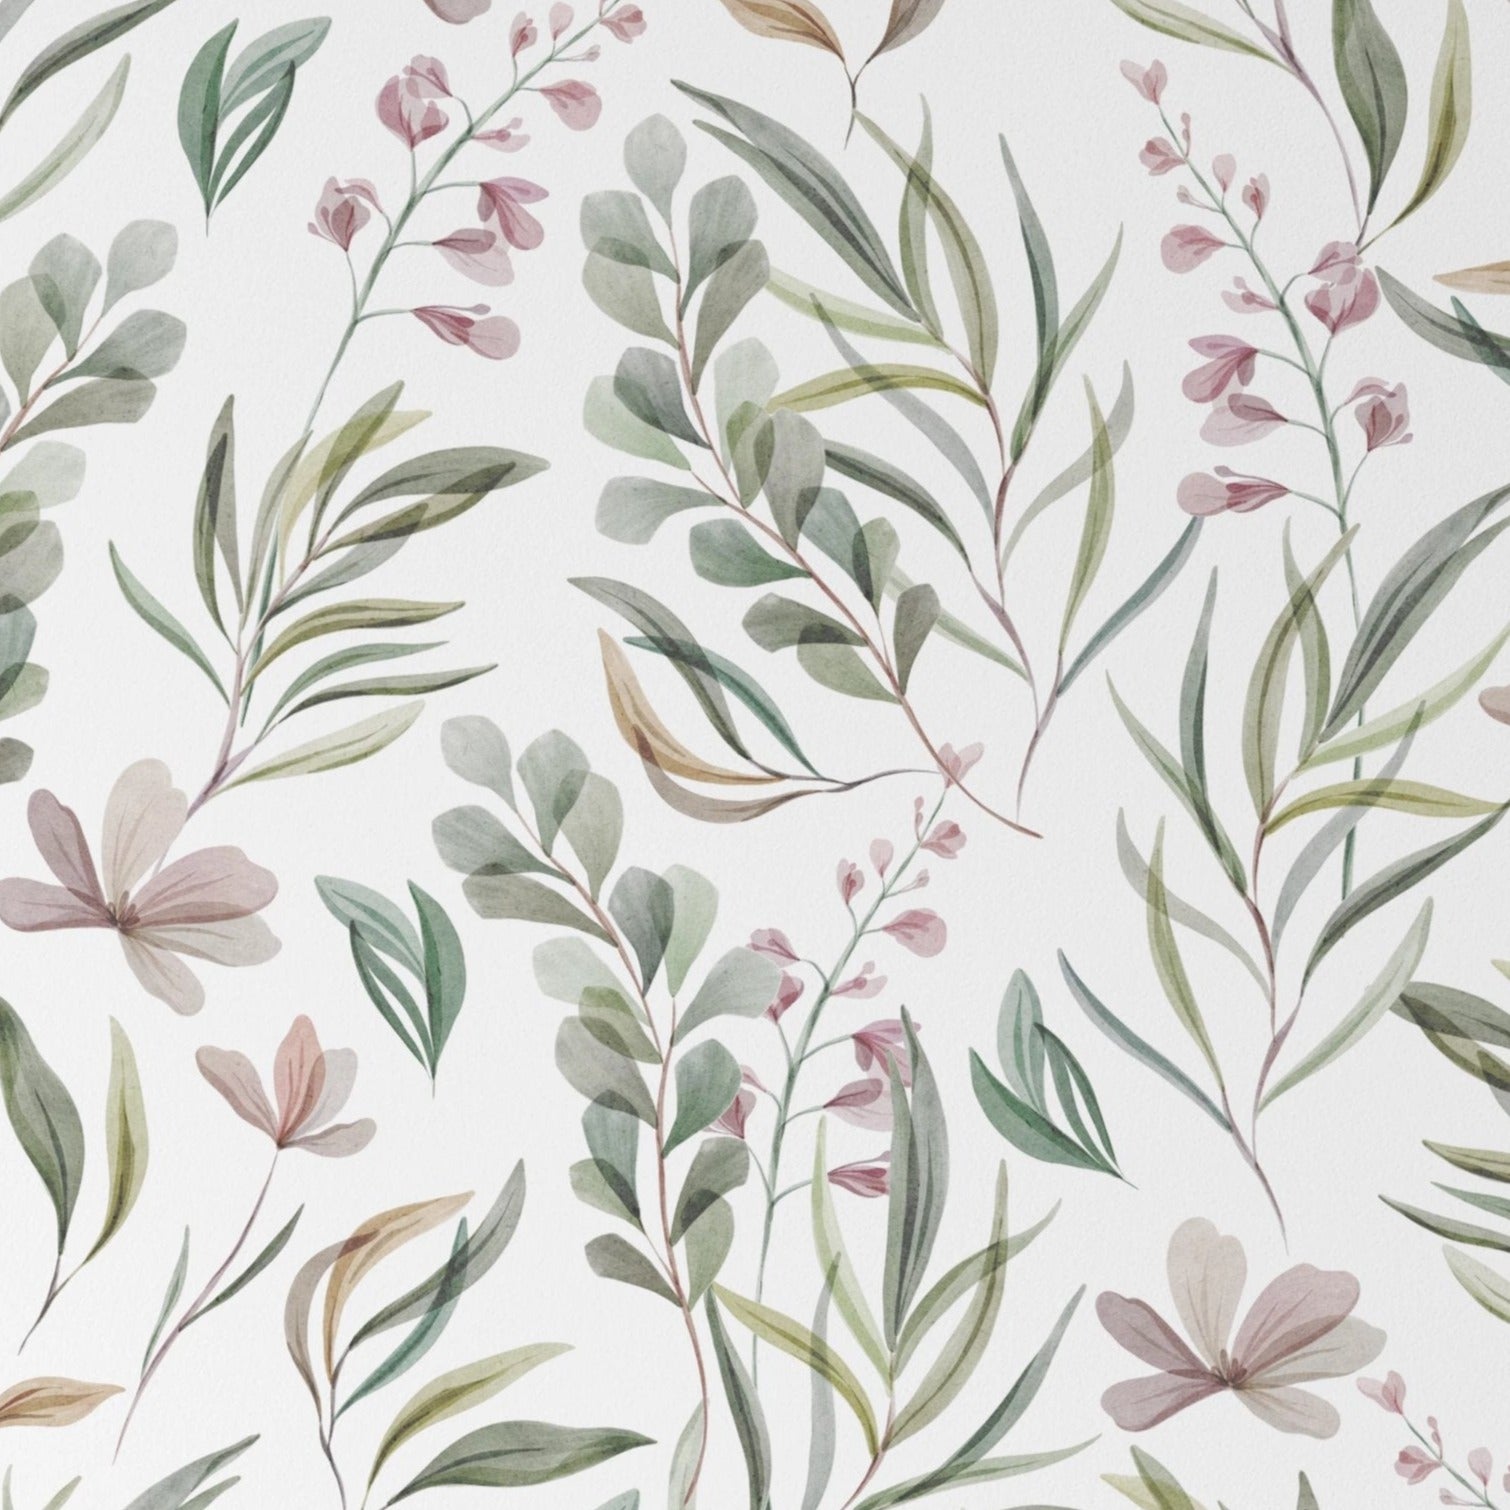 A detailed view of the Botanic Floral Wallpaper showcasing its intricate design with shades of green leaves and pink flowers on a clean white background. The hand-painted watercolor style of the wallpaper exudes a fresh and natural vibe.